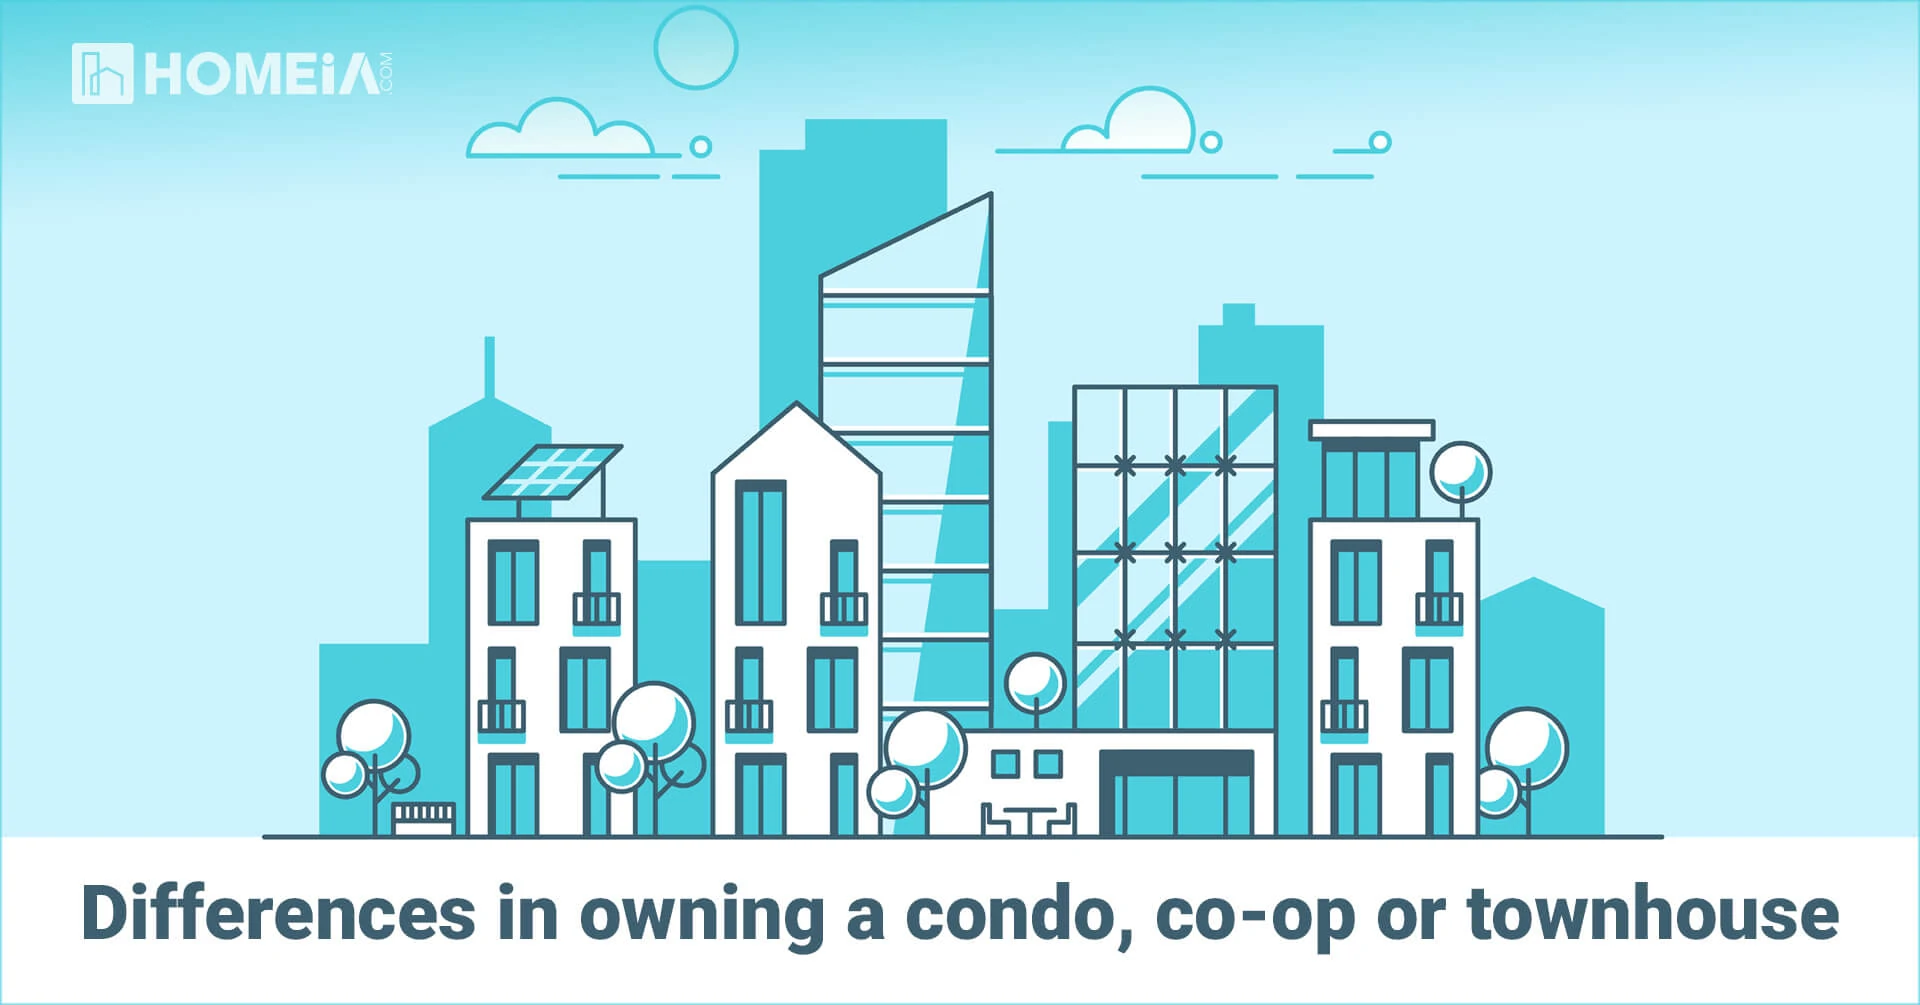 Differences in Owning a Condo, Co-op or Townhouse